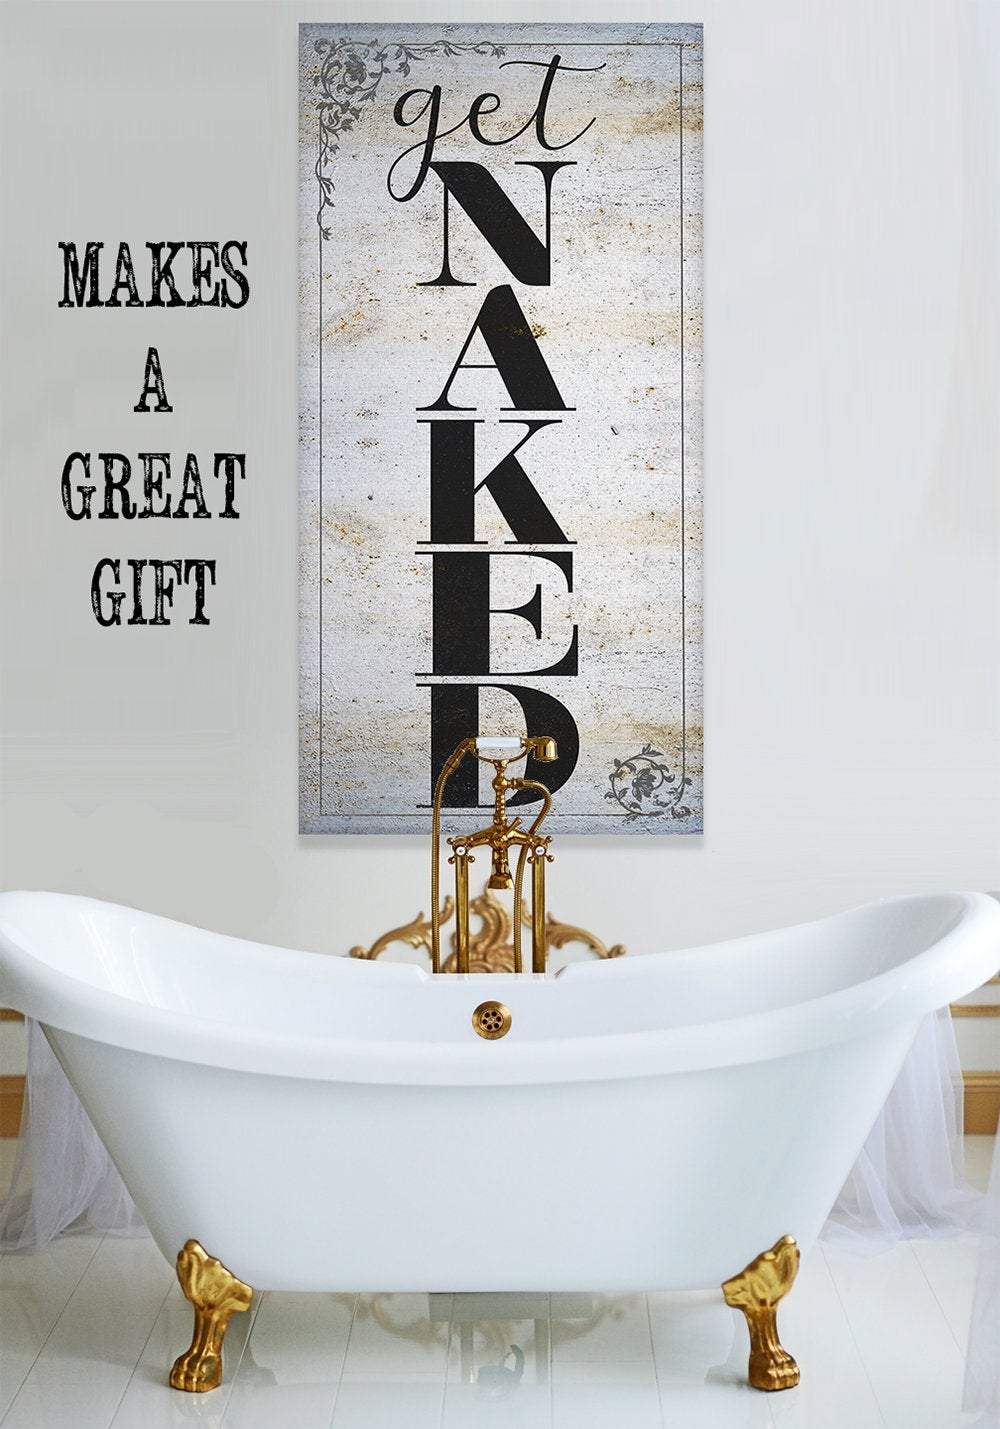 Get Naked - Canvas | Lone Star Art.